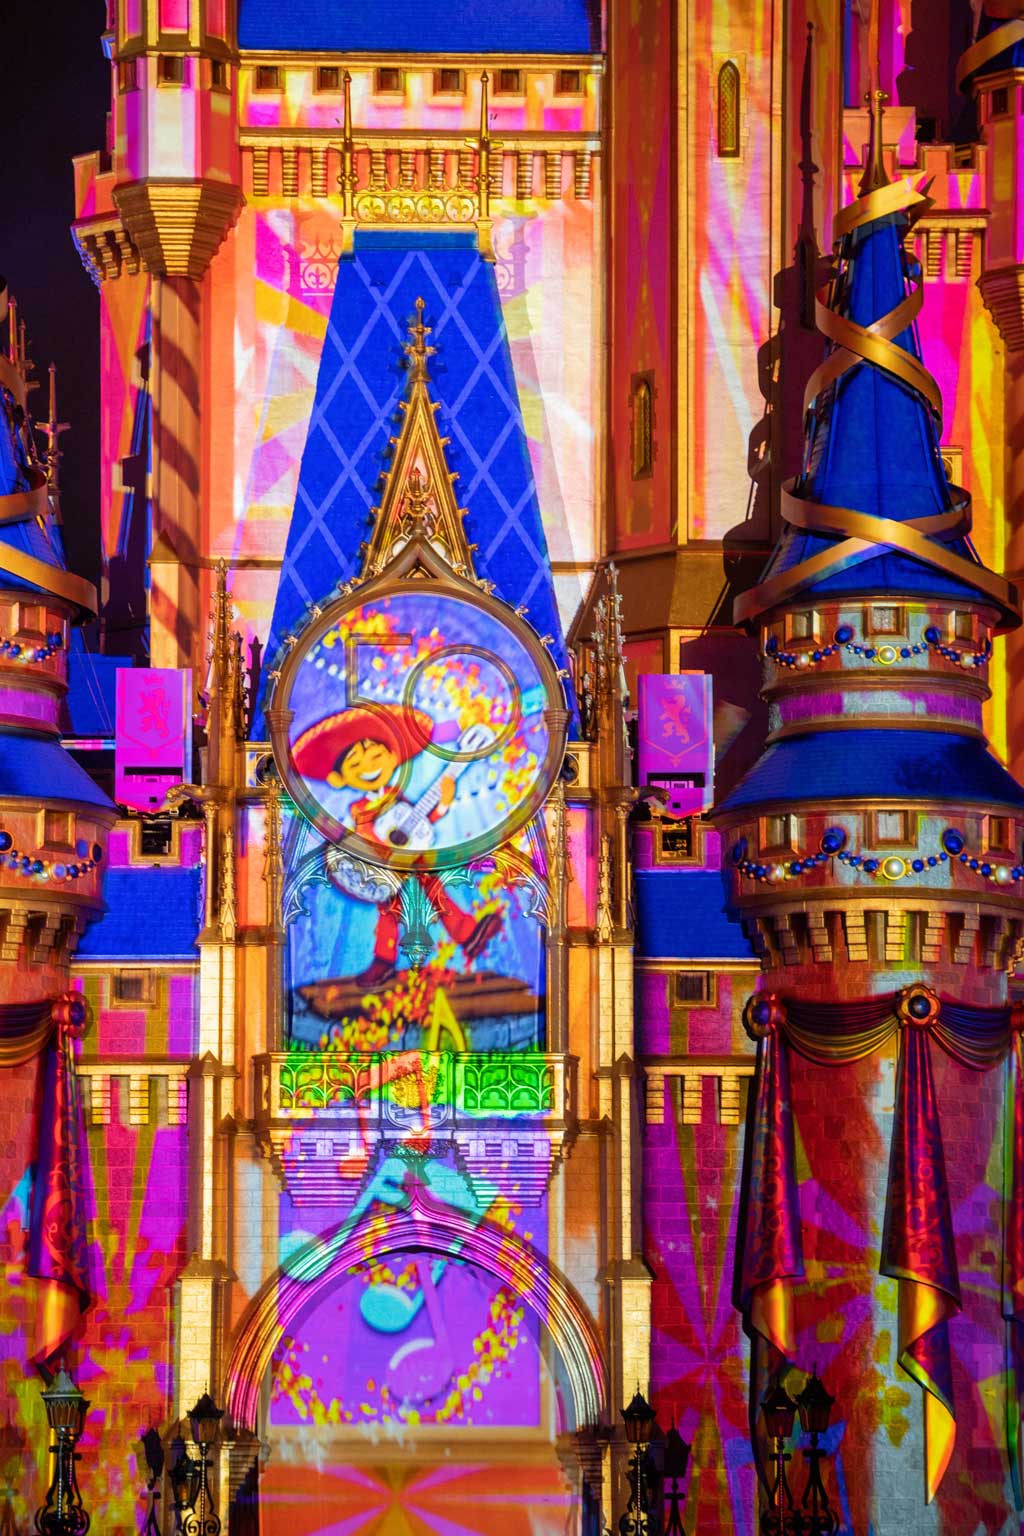 “Disney Enchantment” at Magic Kingdom Park, debuts Oct. 1, 2021, at Walt Disney World Resort in Lake Buena Vista, Fla. The new nighttime spectacular features stunning fireworks, powerful music, enhanced lighting and, for the first time, immersive projection effects that extend from Cinderella Castle down Main Street, U.S.A. (Kent Phillips, photographer)